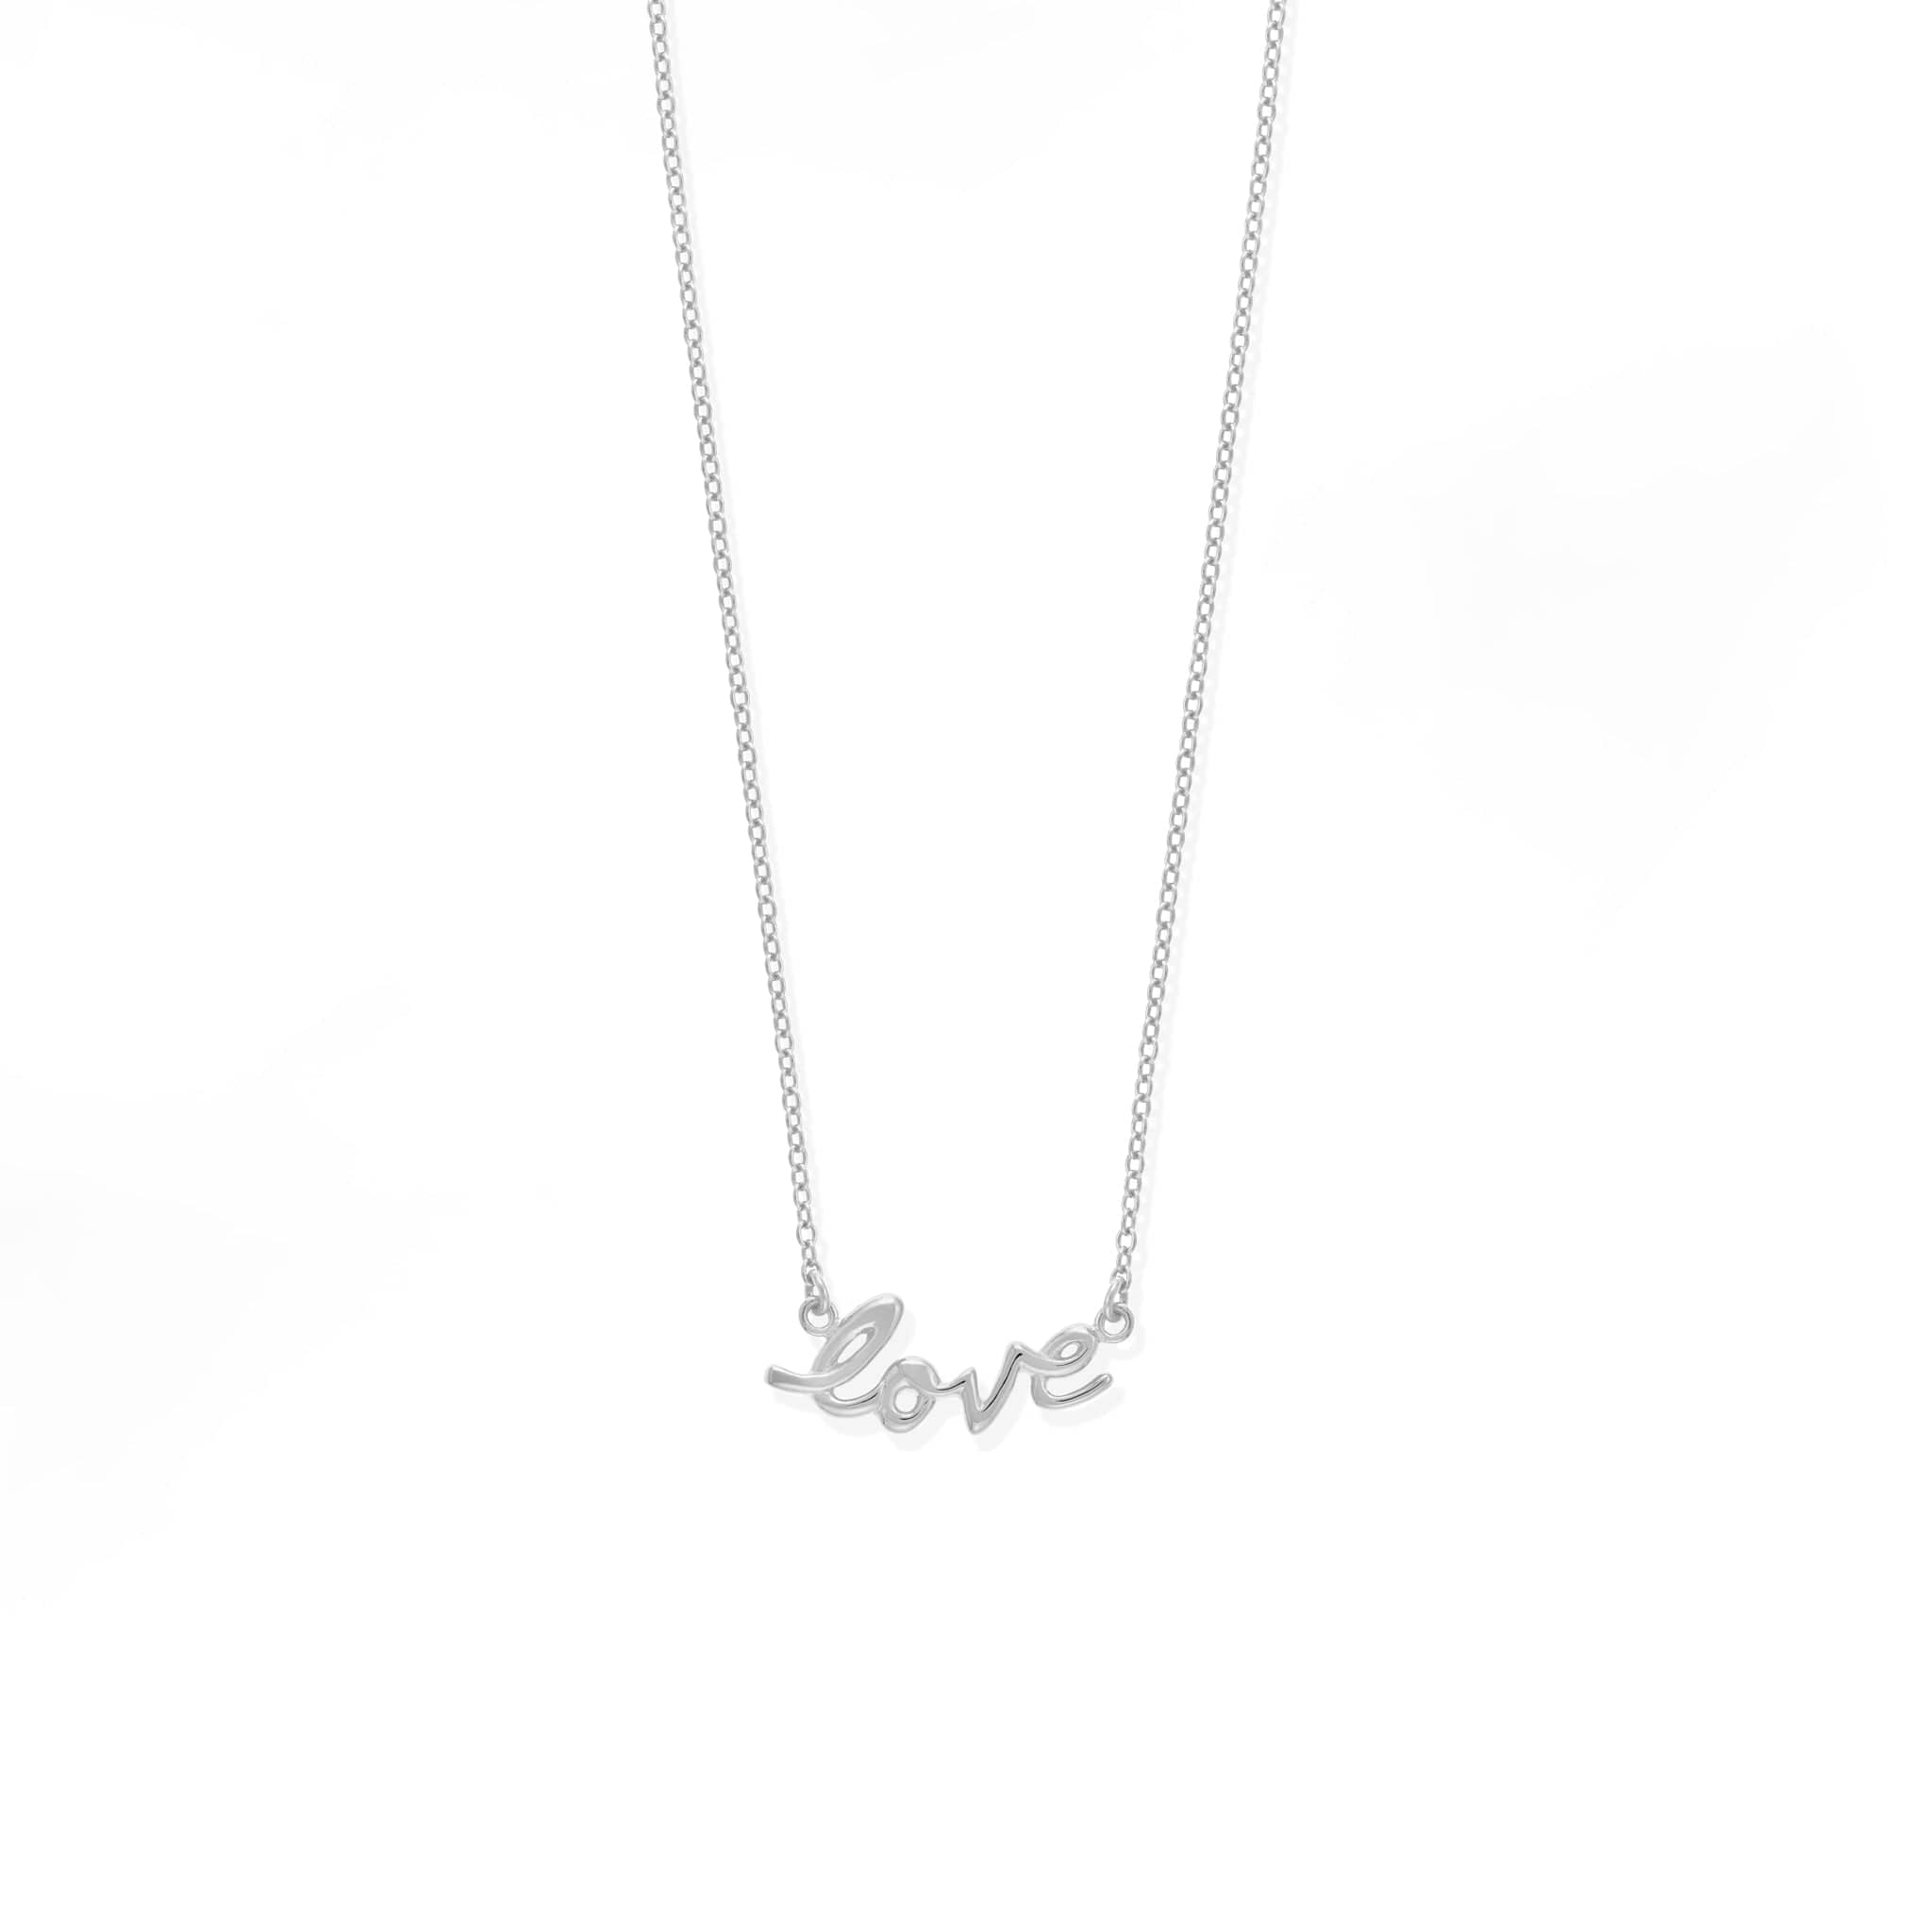 Boma Jewelry Necklaces Sterling Silver Love Necklace